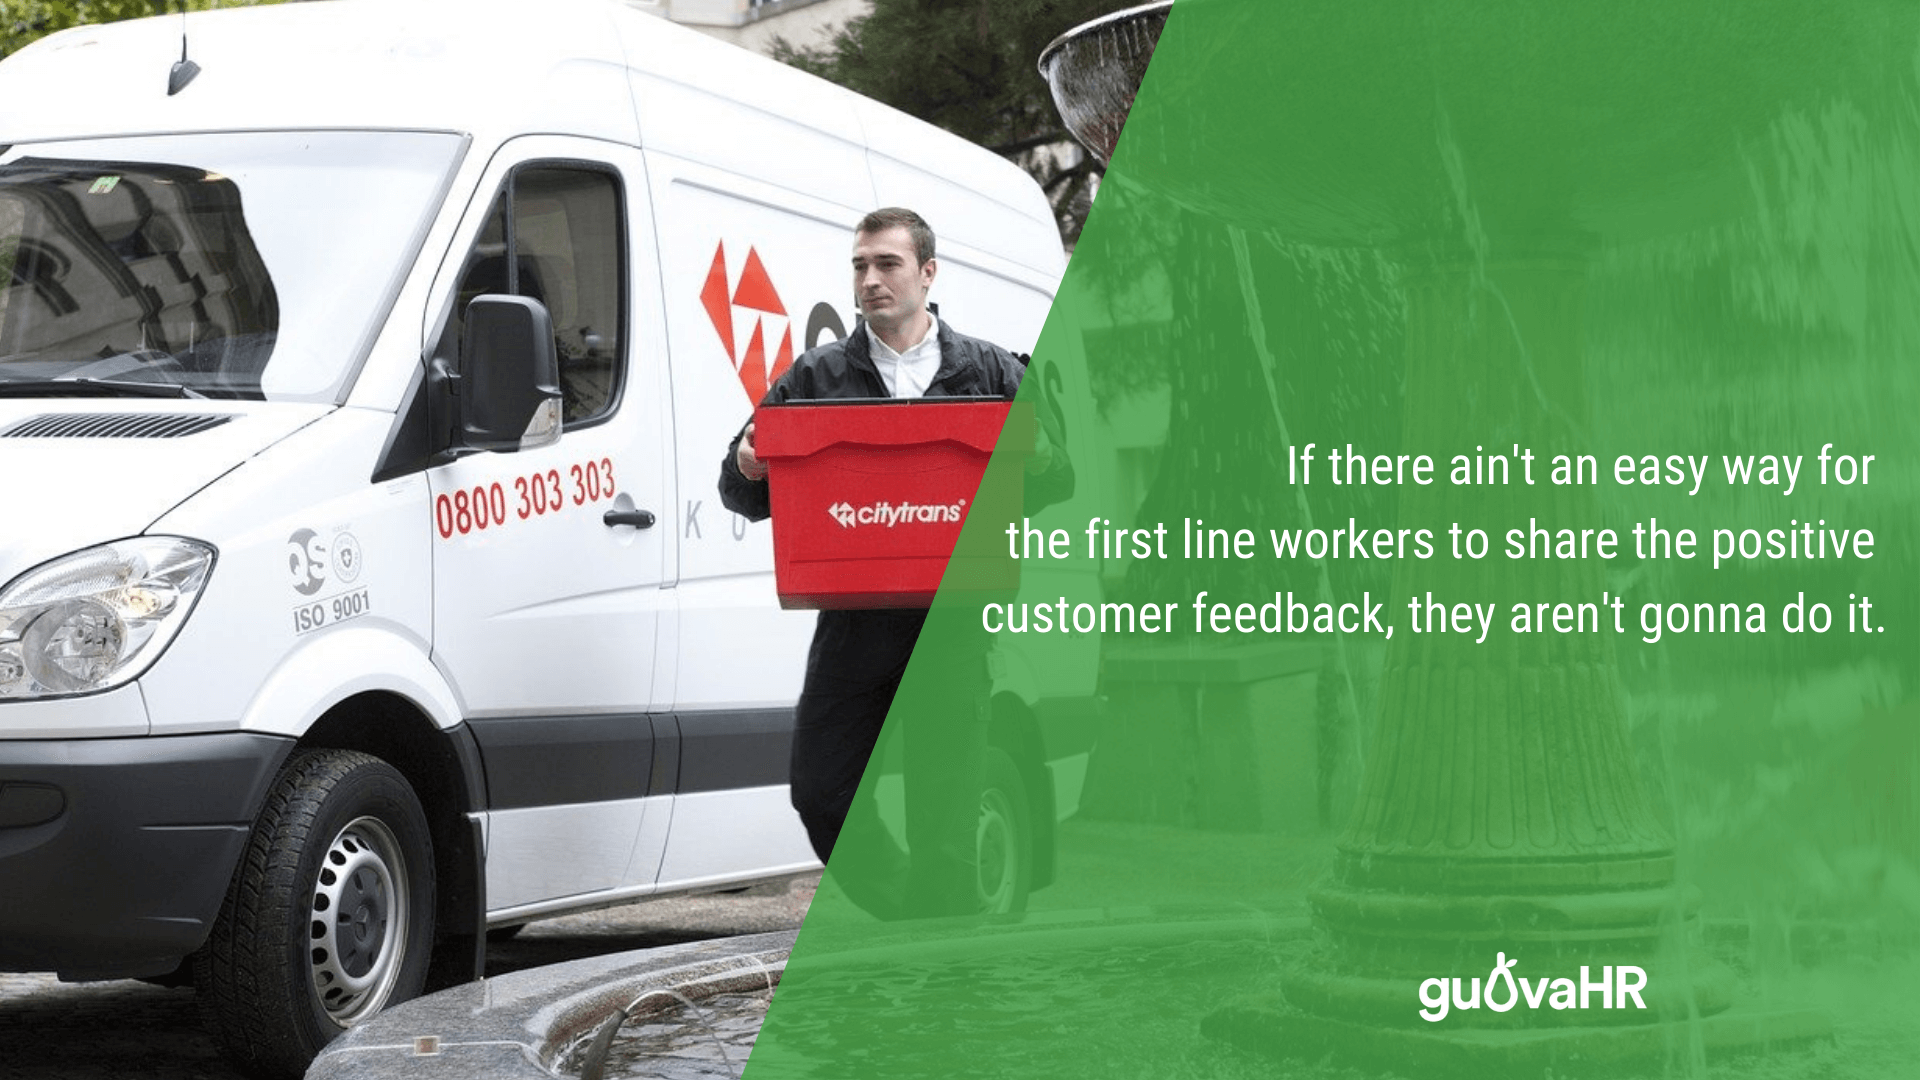 Courier delivering a big parcel and an internal communication problem quote saying 'If there ain't an easy way for the first line workers to share the positive customer feedback, they aren't gonna do it.'